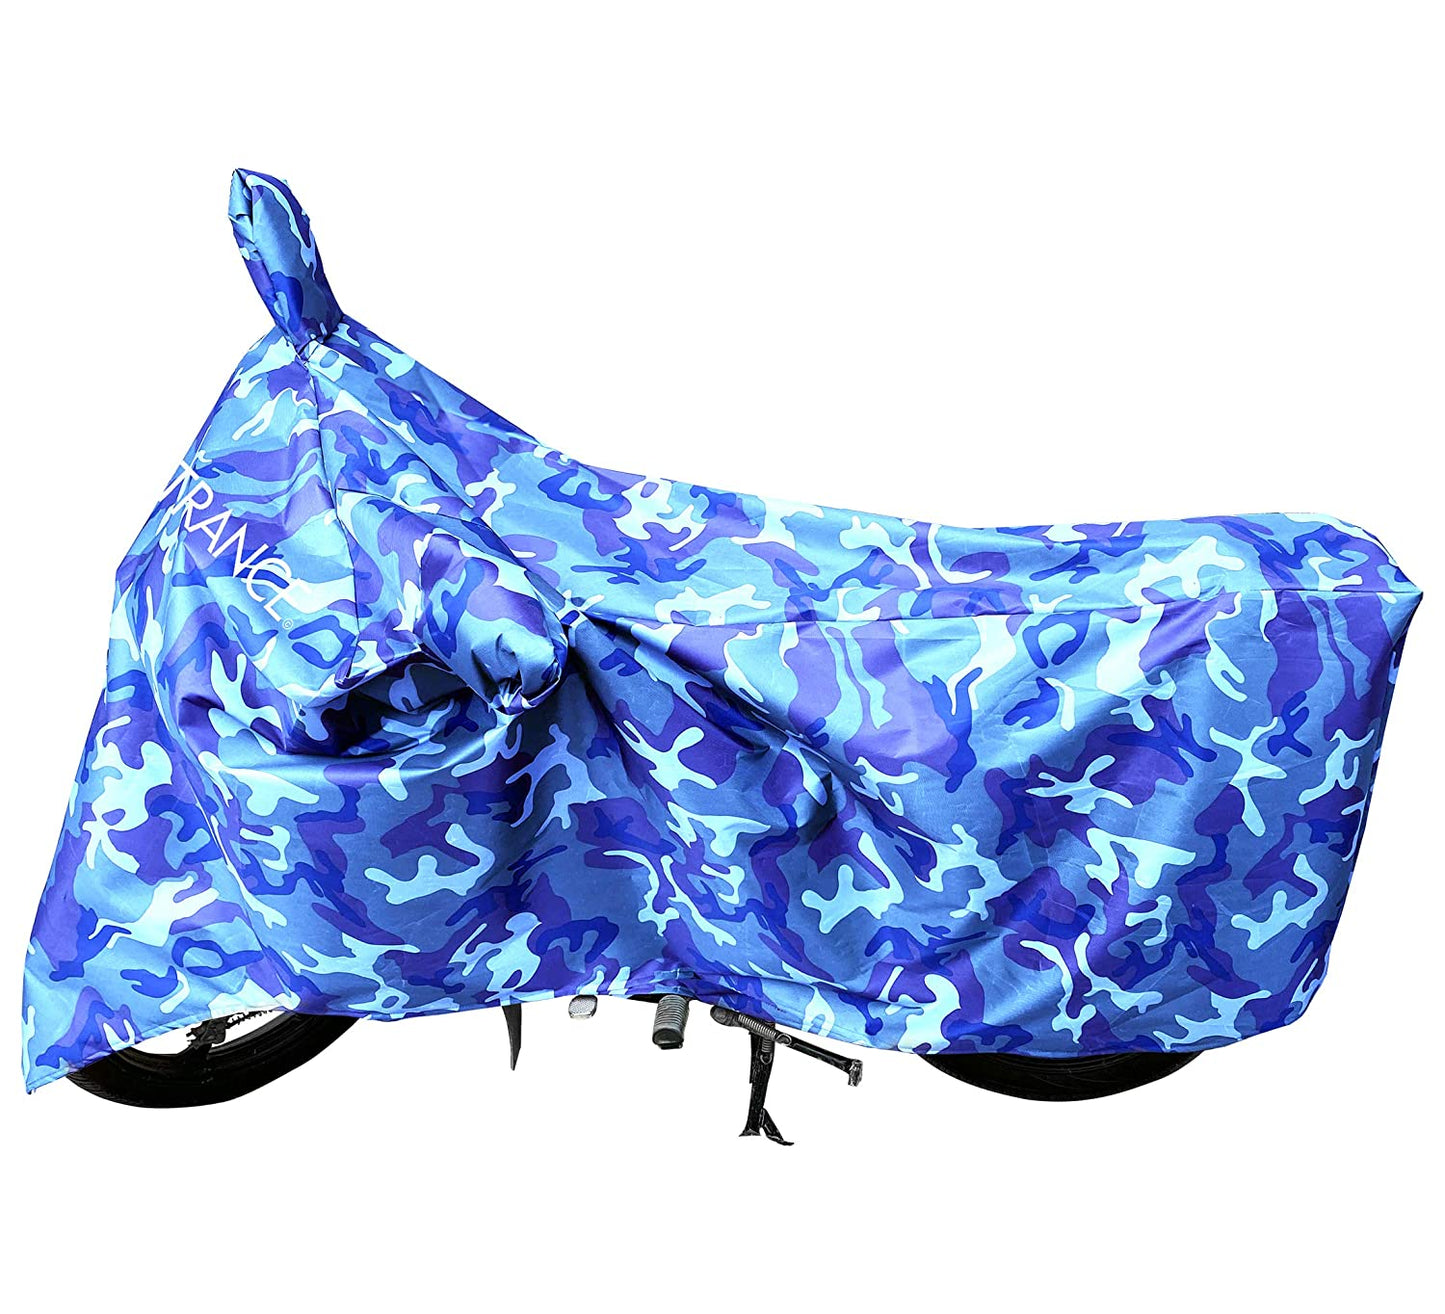 MotoTrance Jungle Bike Body Covers For HondaÂ  CB300R 2019 - Interlock-Stitched Waterproof and Heat Resistant with Mirror Pockets